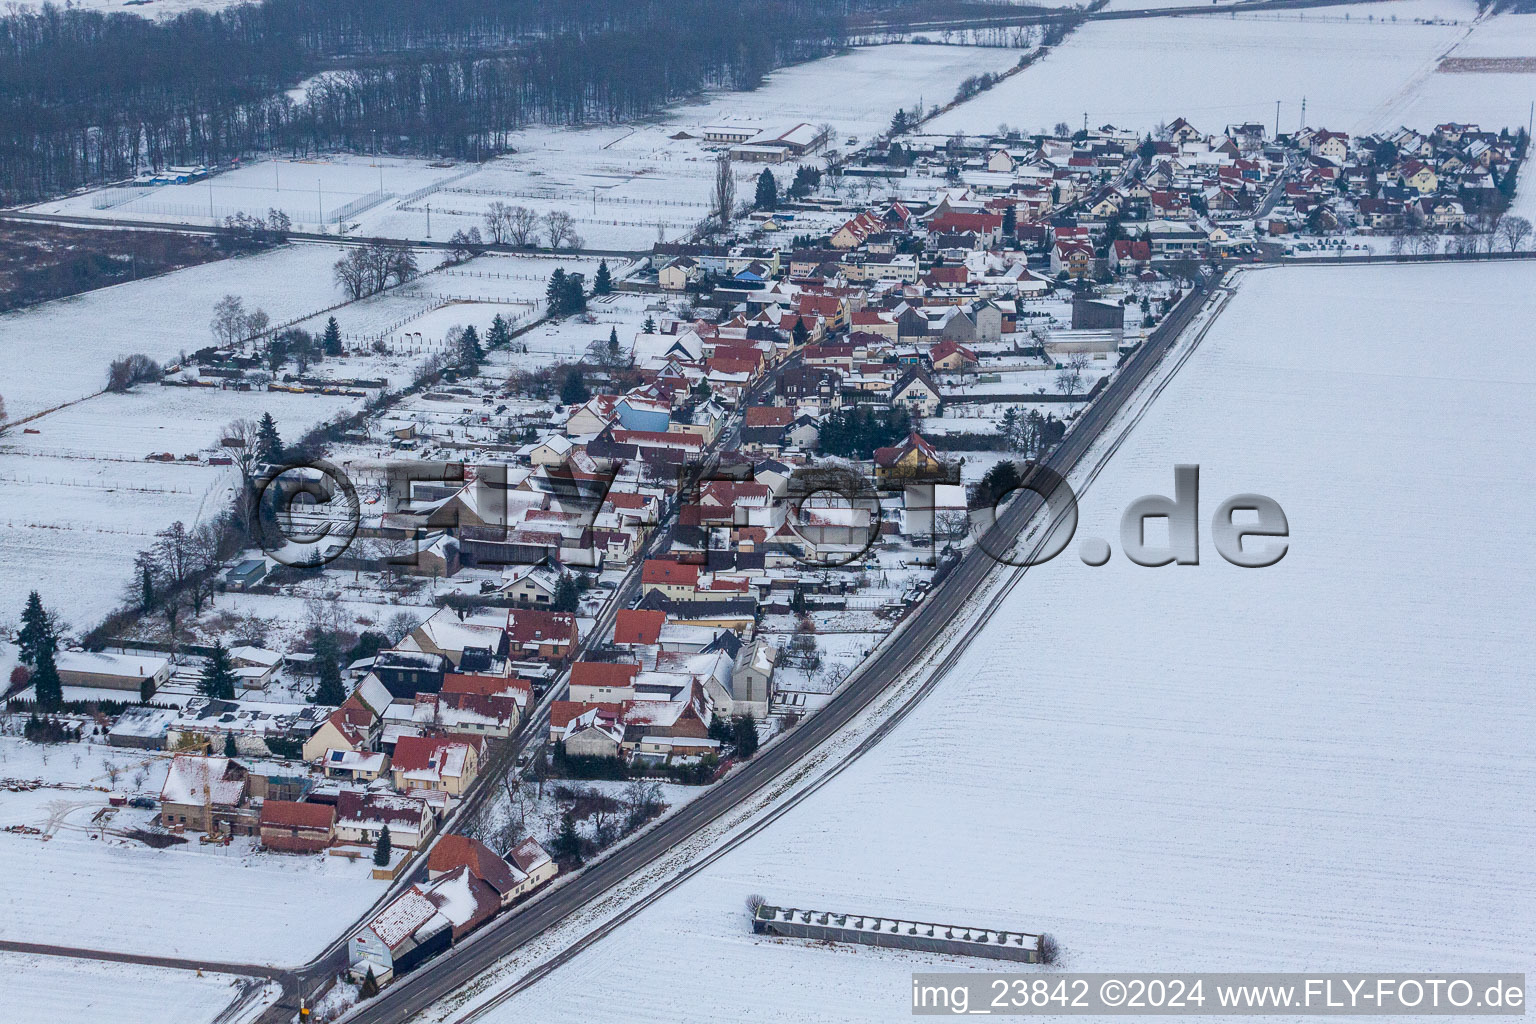 Wintry snowy Village - view on the edge of agricultural fields and farmland in the district Minderslachen in Kandel in the state Rhineland-Palatinate